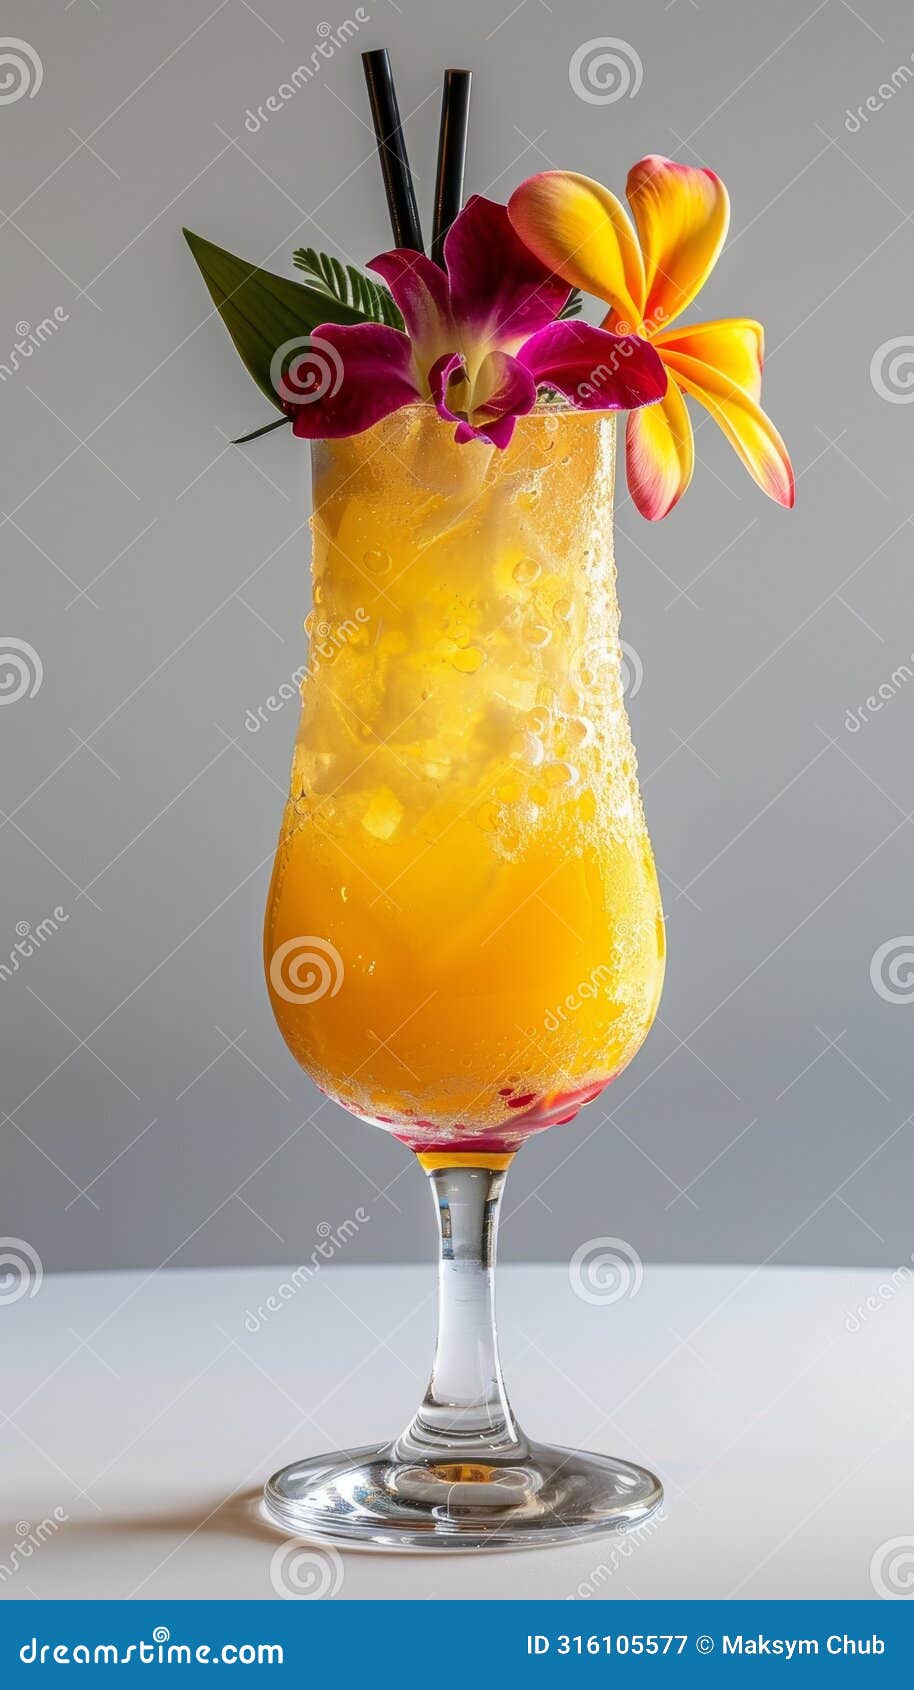 sophisticated modern cocktail in stylish glass with vibrant adornments on white background